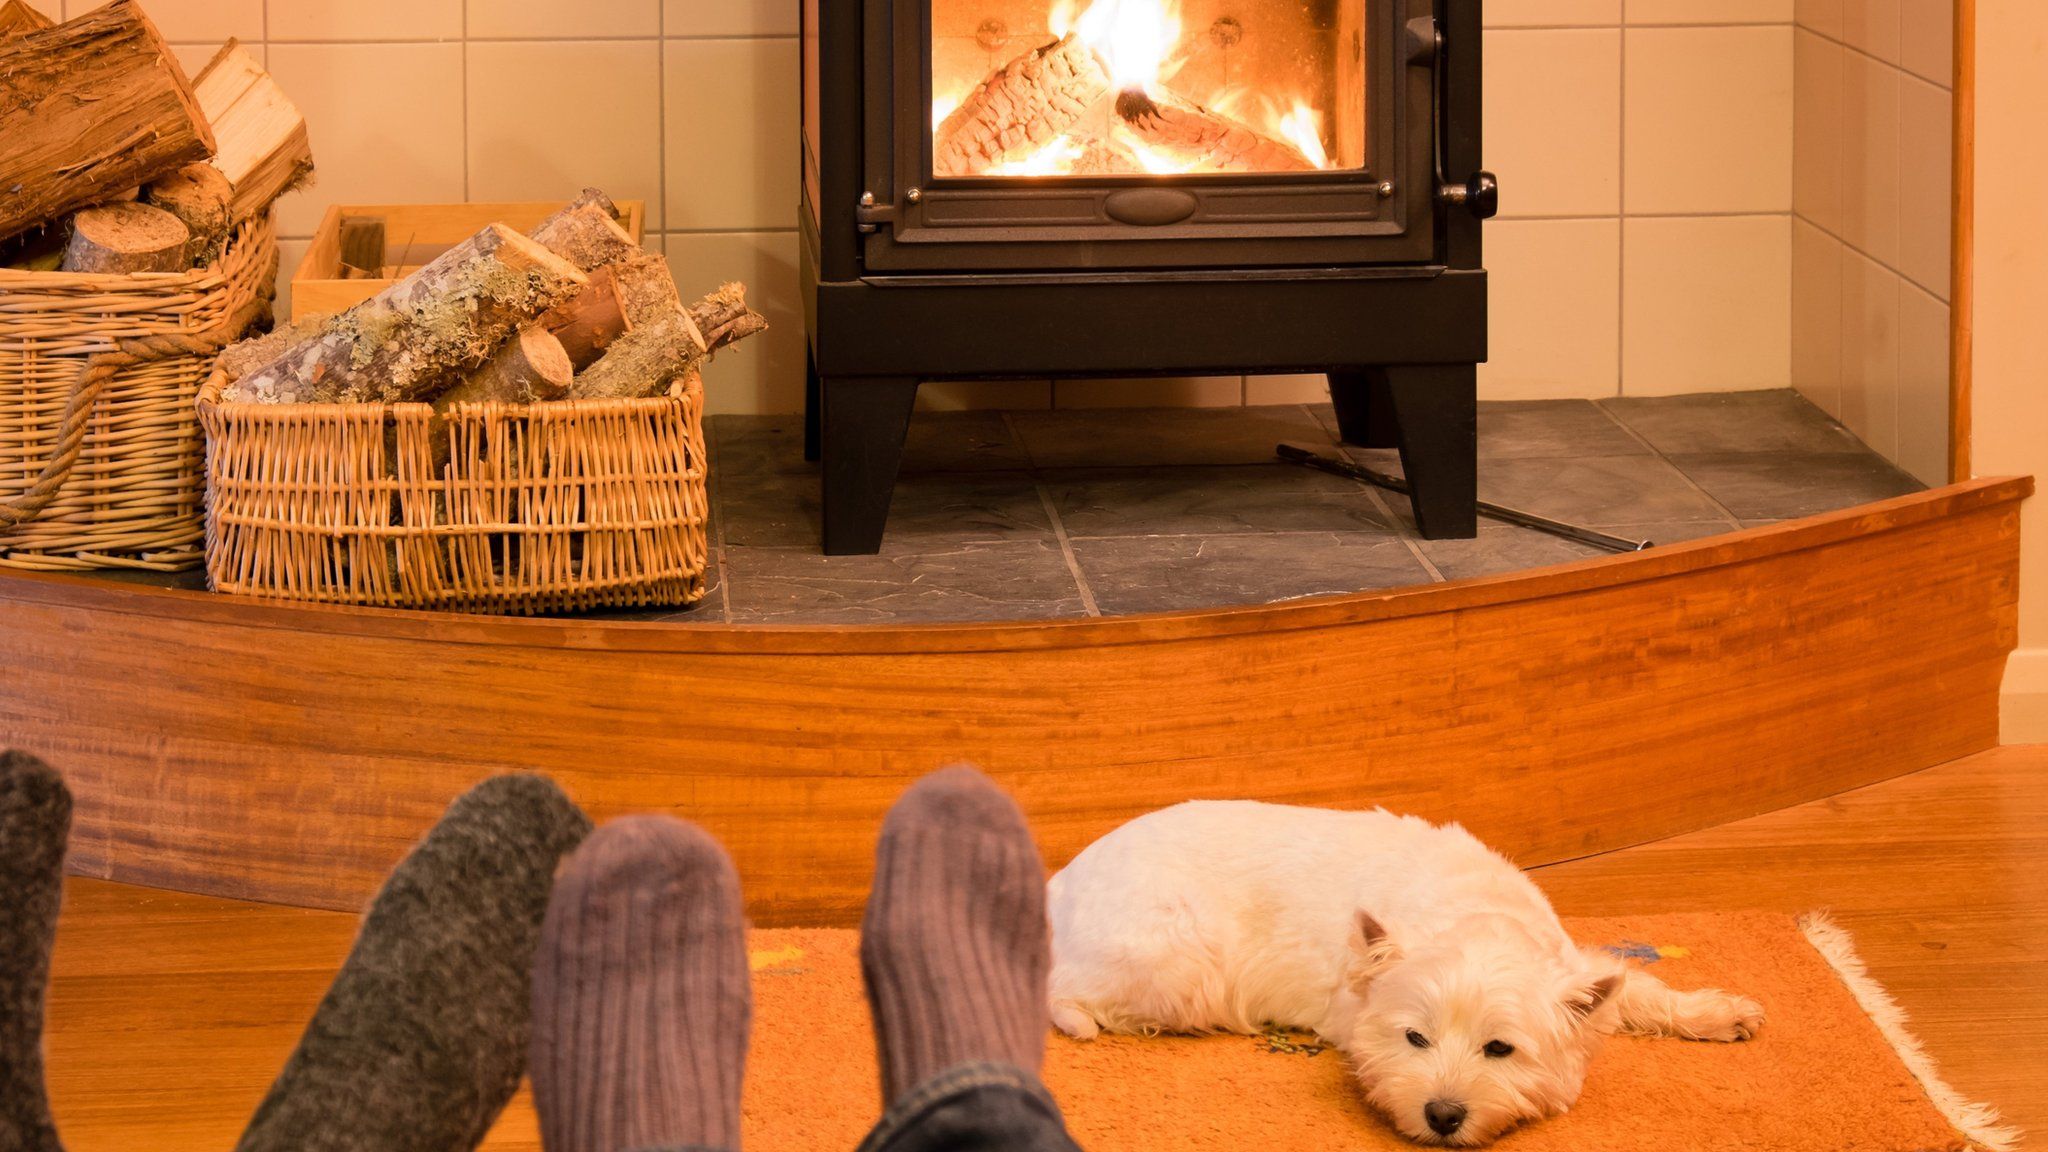 Wood burner with dog in front